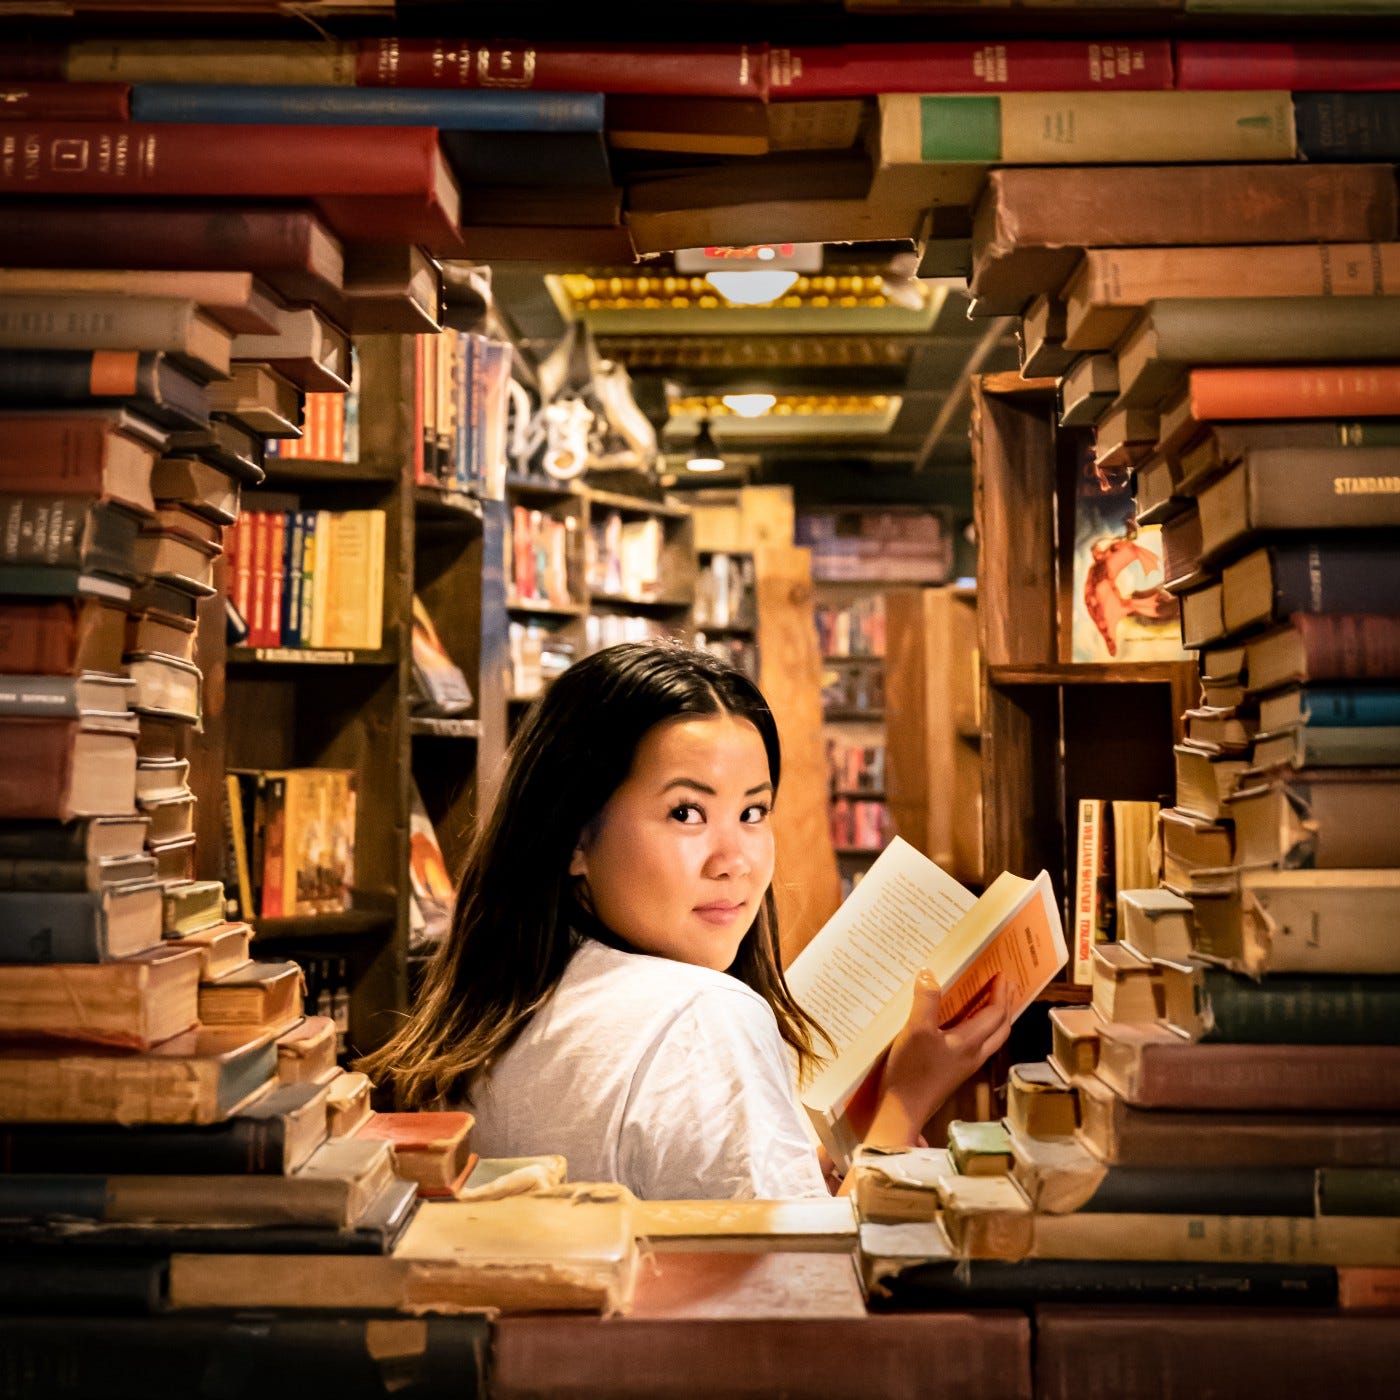 A woman reading a single paper book in the middle of piled books and books on shelves. She looks back at the viewer with a smile.